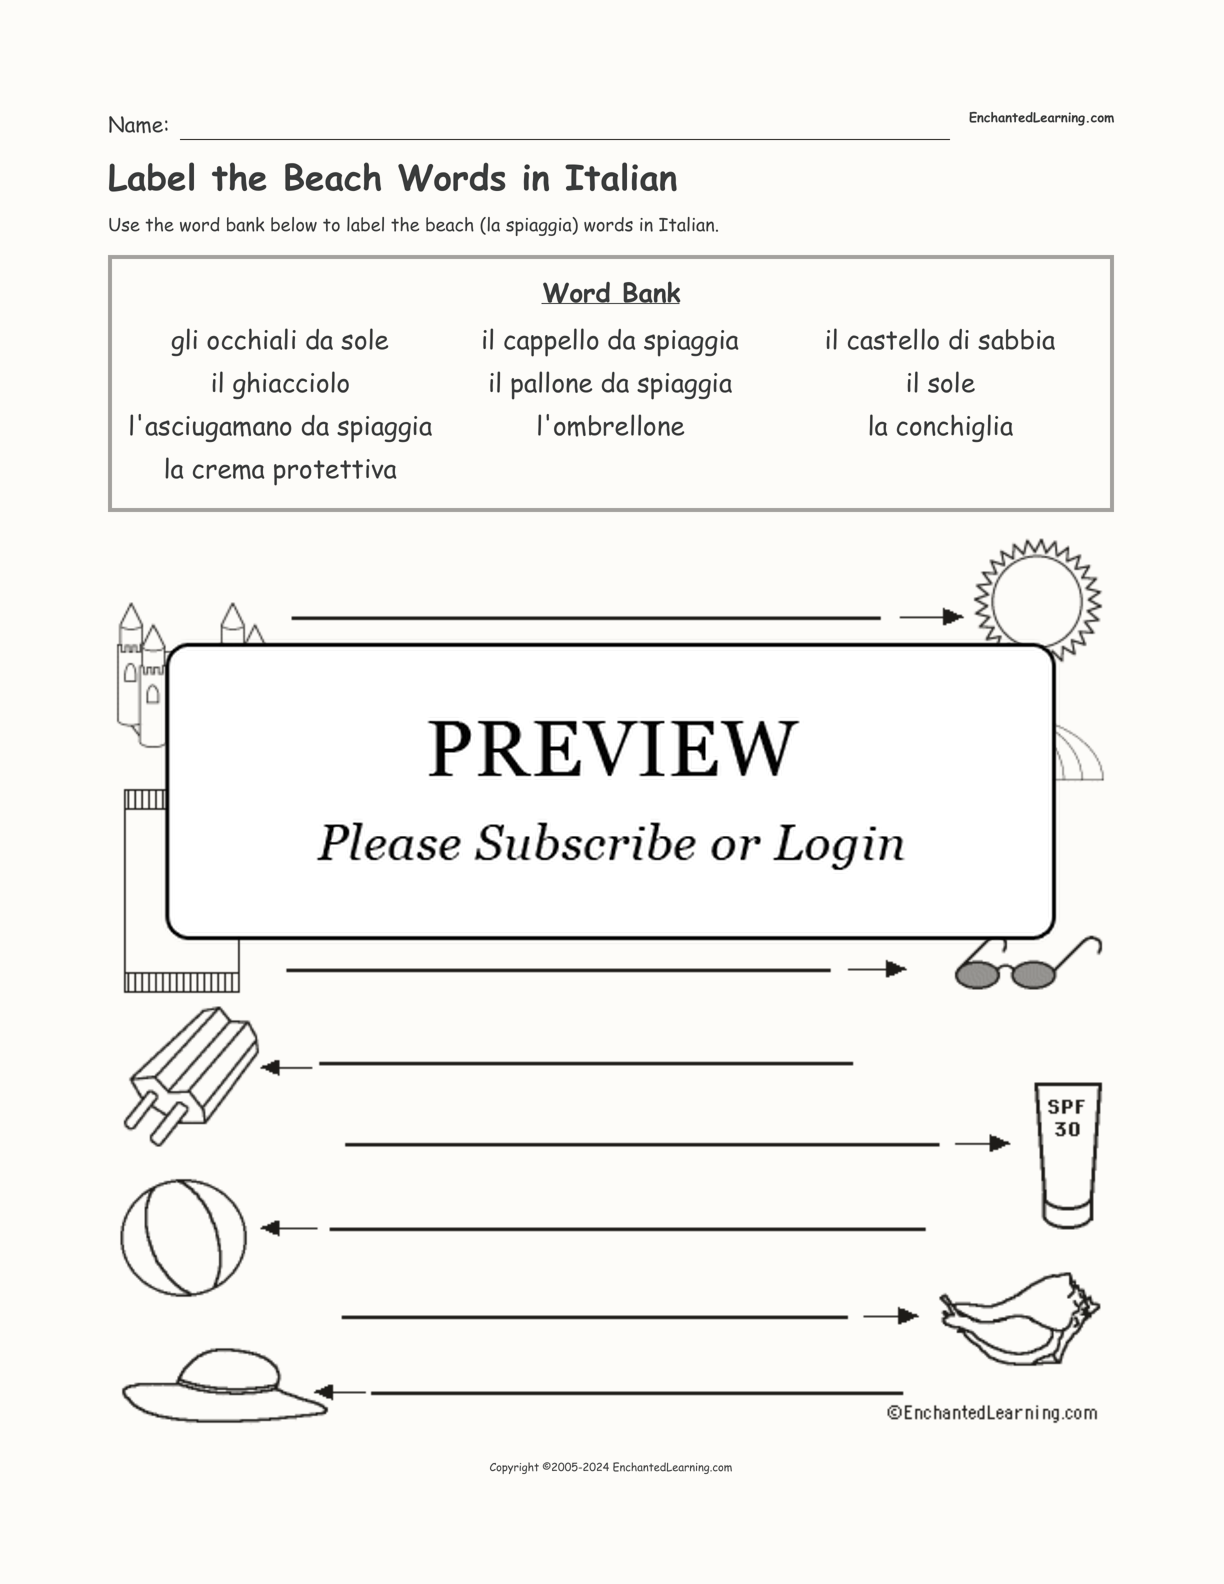 Label the Beach Words in Italian interactive worksheet page 1